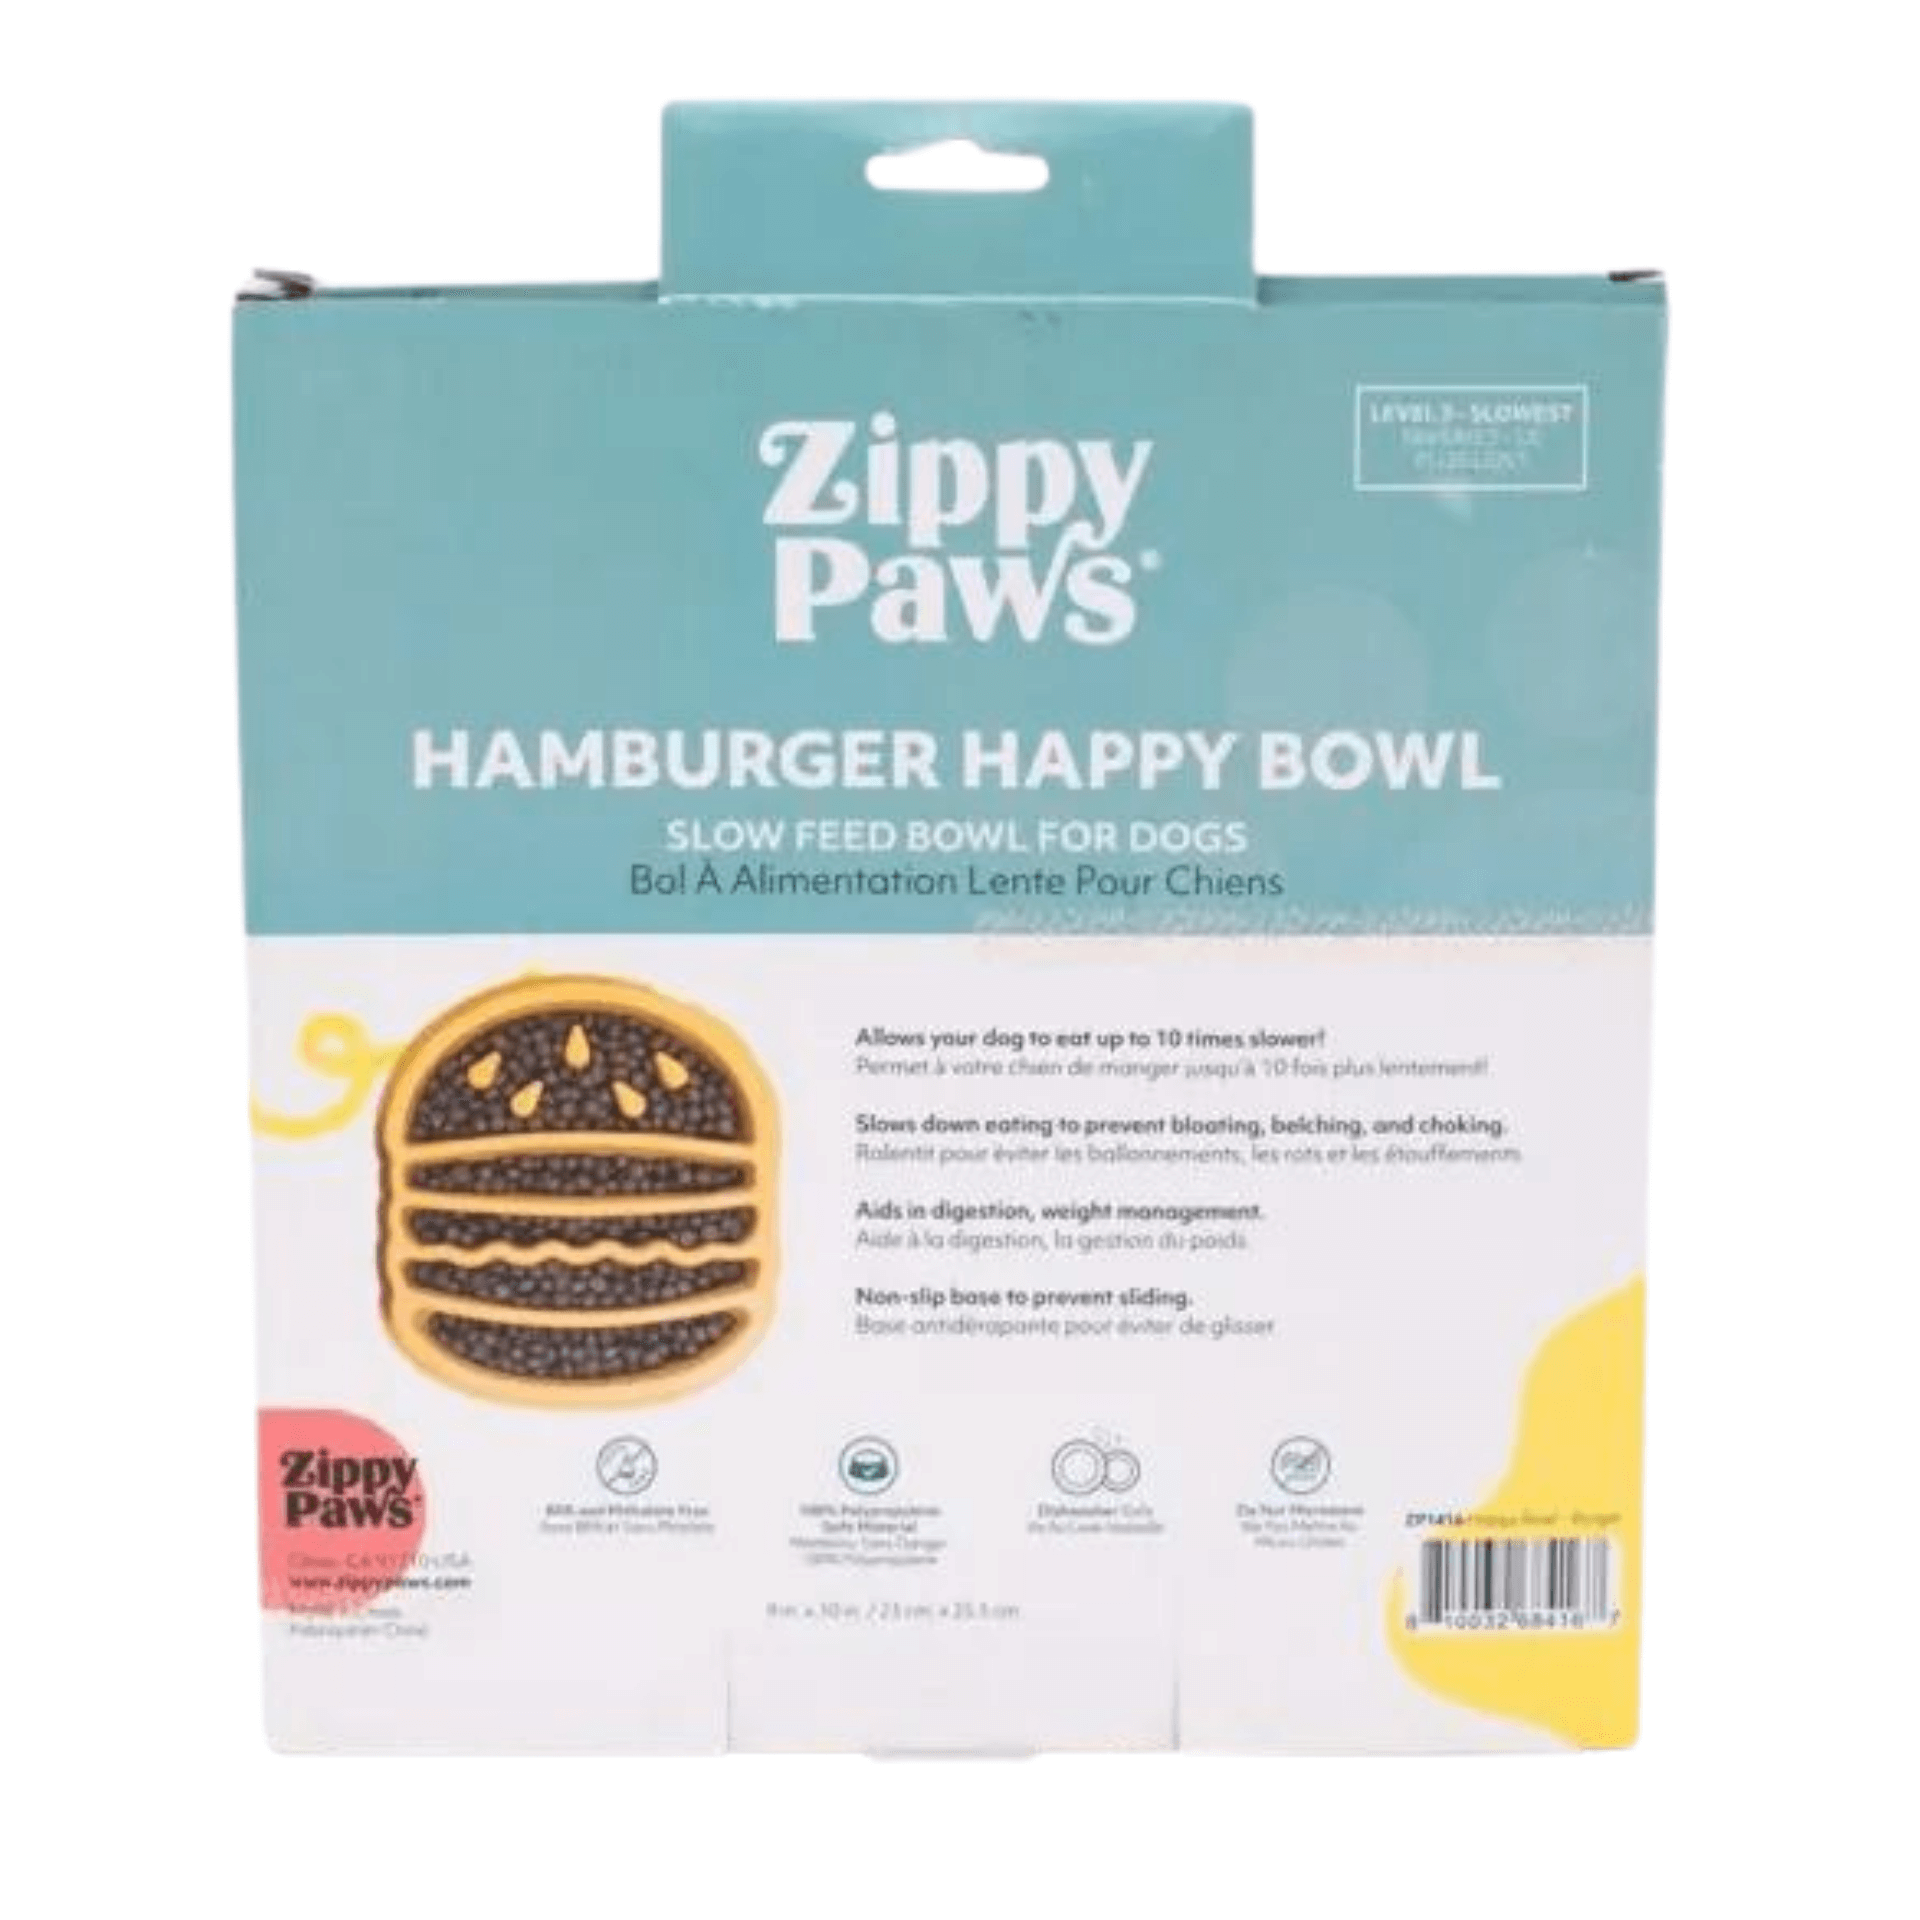 Hamburger shaped slow feeder bowl for dogs